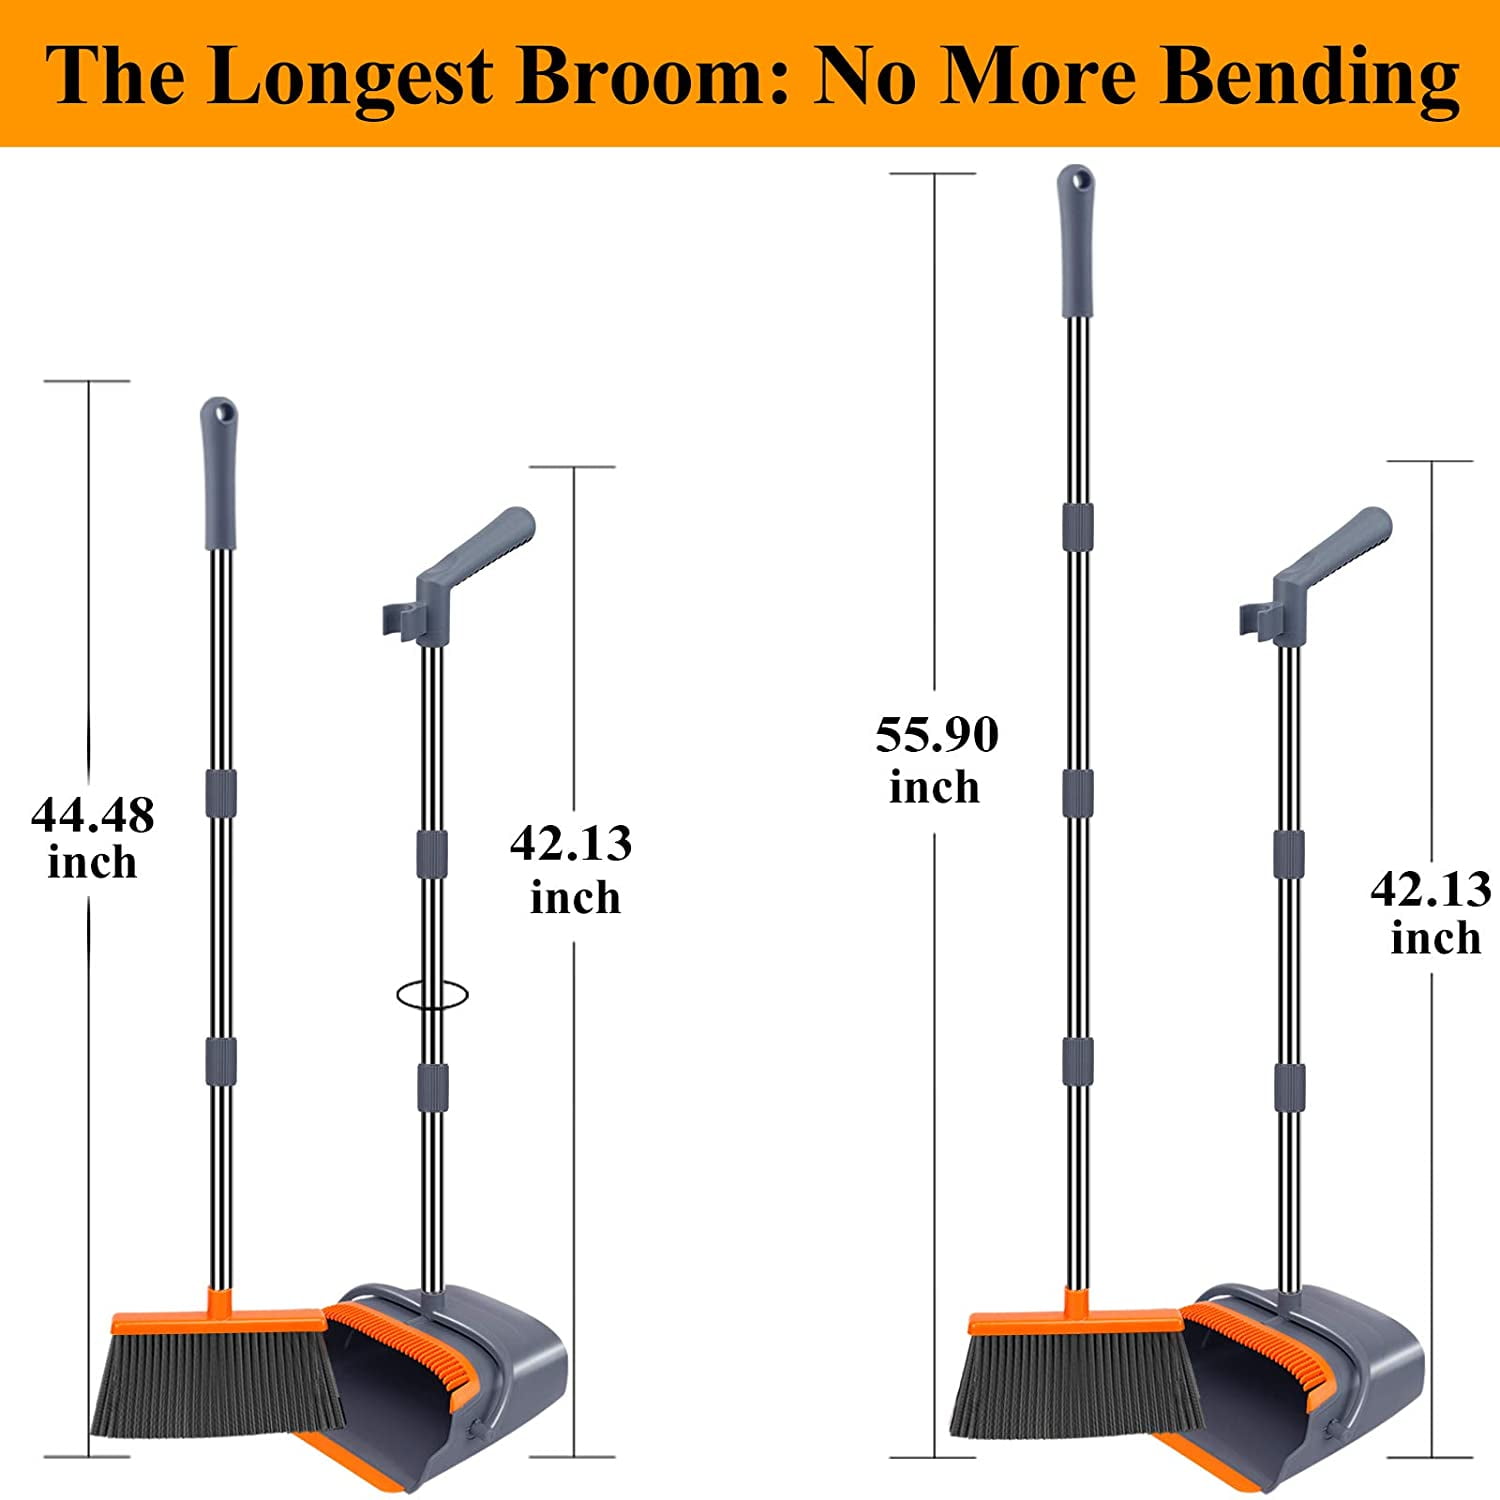 kelamayi Upgrade Broom and Dustpan Set Super Long Handle Upright Stand Up Broom and Dustpan Set Gray&Orange Ideal for Dog Cat Pets Home Use Self-Cleaning with Dustpan Teeth 